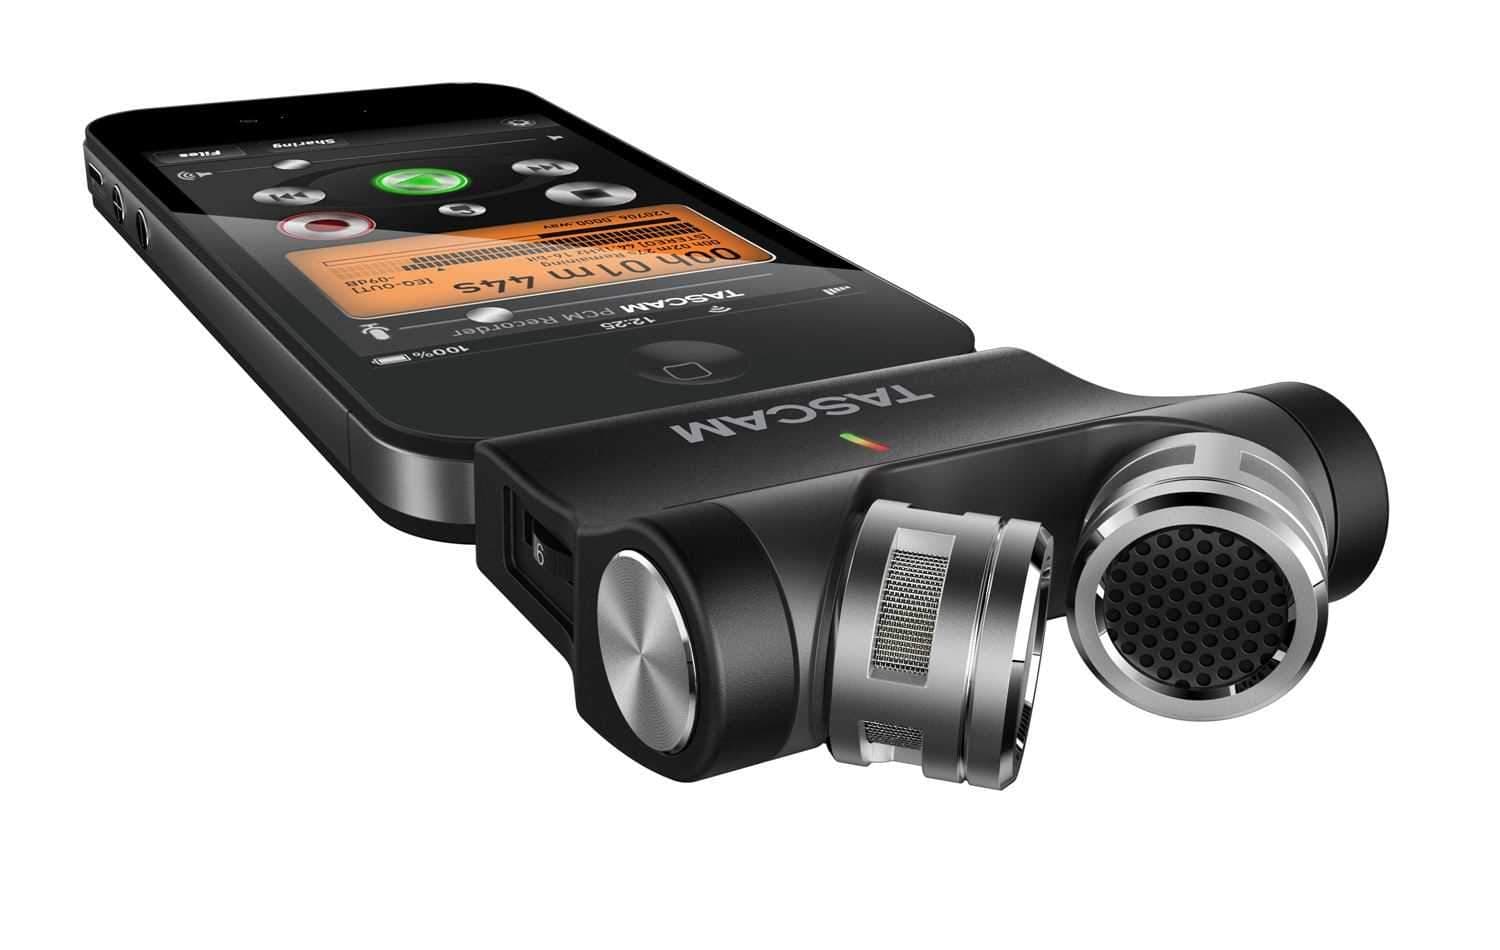 Tascam IM2X X-Y Stereo Microphones for iPhone - PSSL ProSound and Stage Lighting